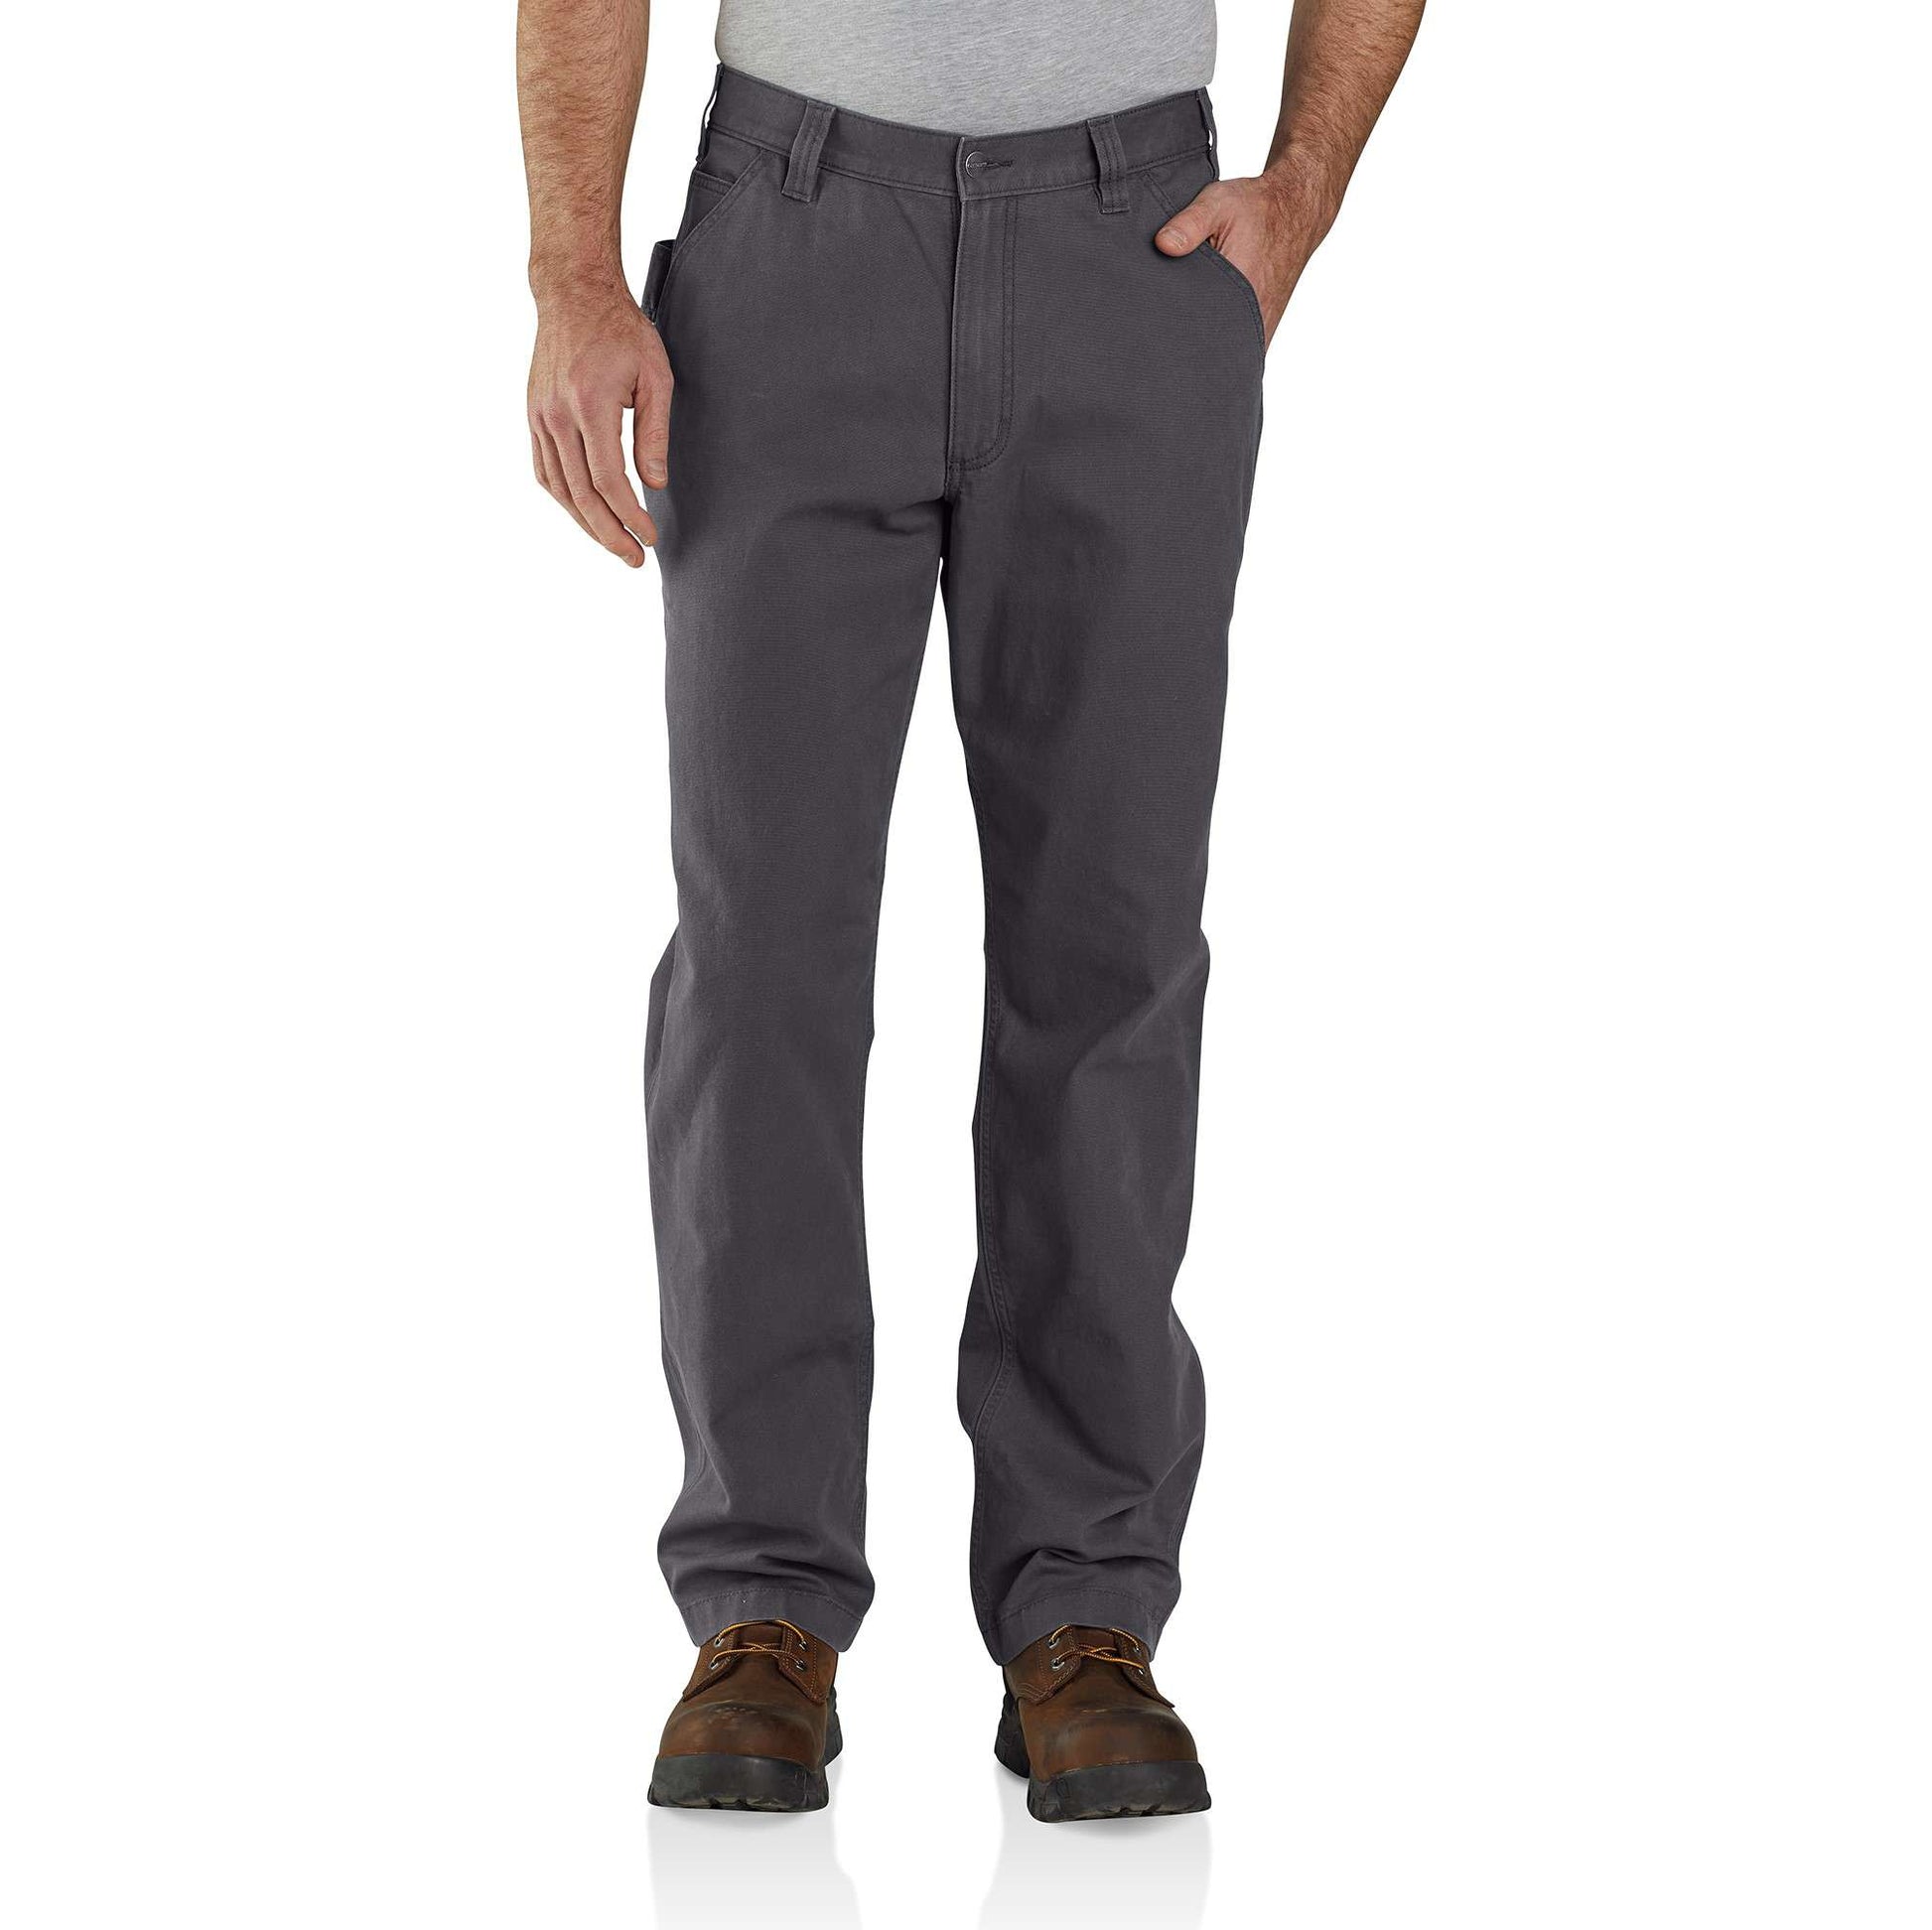 Rugged Flex® Loose Fit Canvas Work Pant